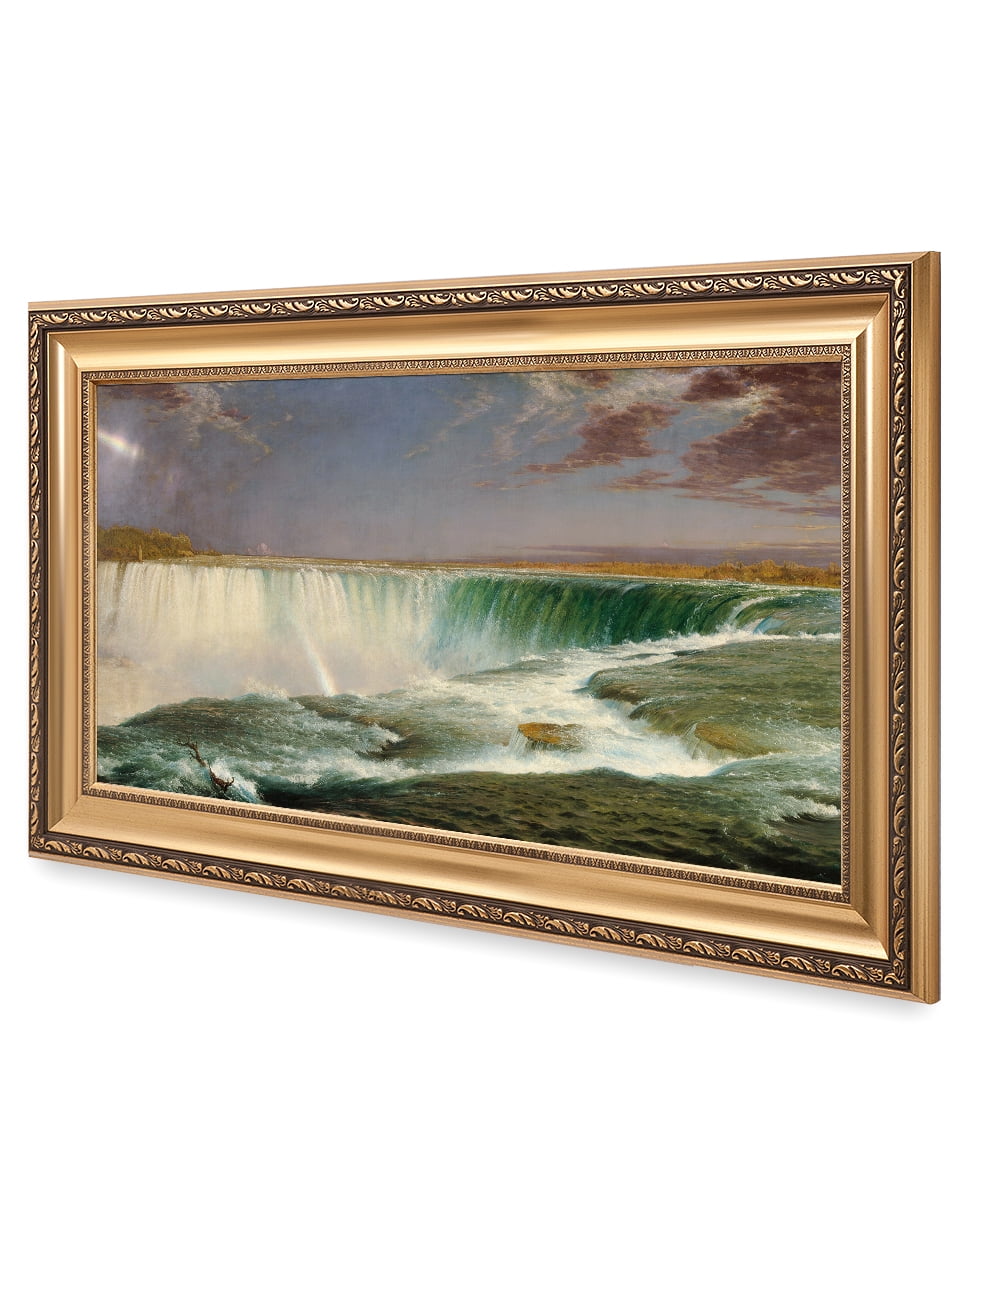 DECORARTS Niagara Falls by Frederic Edwin Church, Giclee Print on Canvas.  Ready to Hang Framed Wall Art for Home and Office Decor. Total Size w/ Frame:  36x22